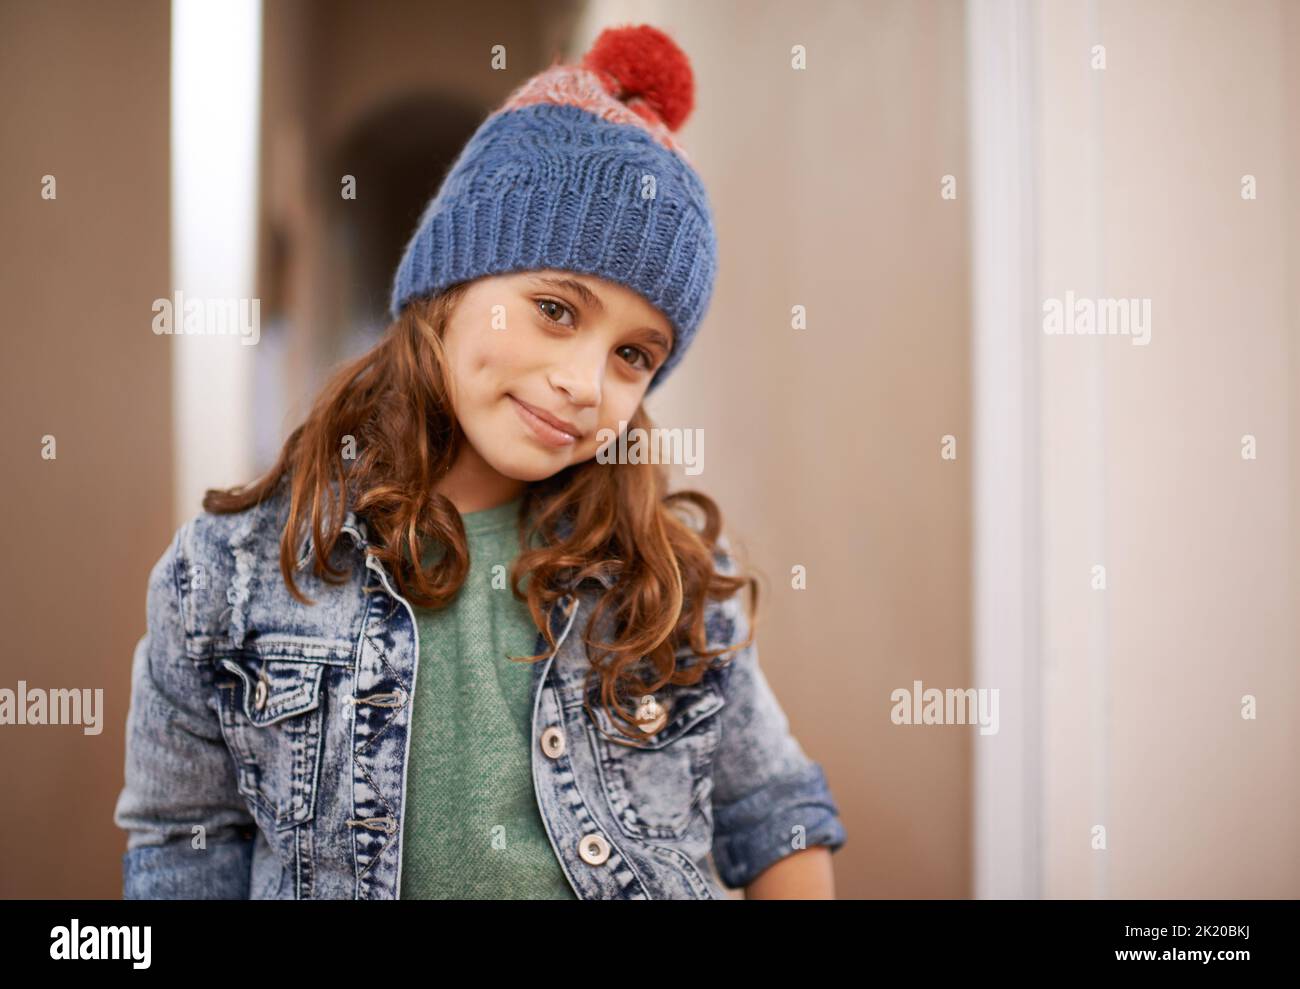 Dressed warm for winter. a cute young girl posing indoors. Stock Photo